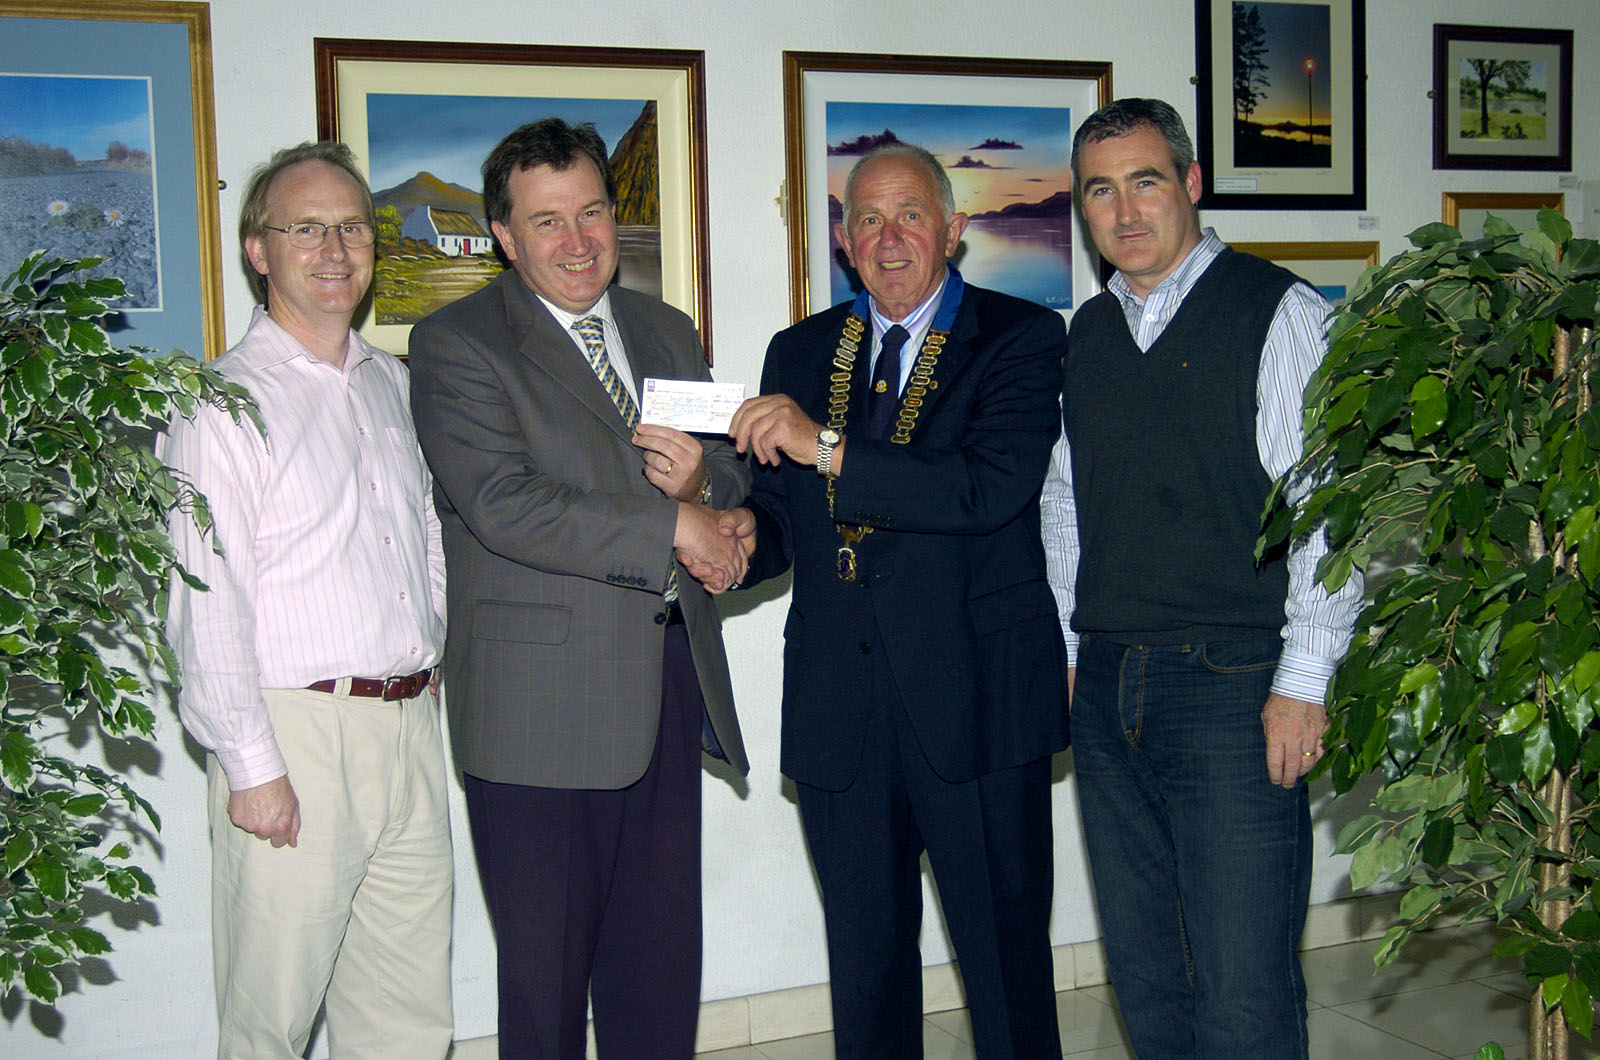 Members of Castlebar Lions Club pictured in Mayo General Hospital at a presentation of a cheque for 12.500 to Dr. Kevin Barry for the MRI Scanner Fund, which were the proceeds from the Opera night which was held in March in the Royal Theatre Castlebar. L-R: Dr. Michael ONeill (Liaison person with MRI Committees), Dr. Kevin Barry, Eamonn Horkan President Lions Club, Gerry Moane: Photo  KWP Studio 094. 